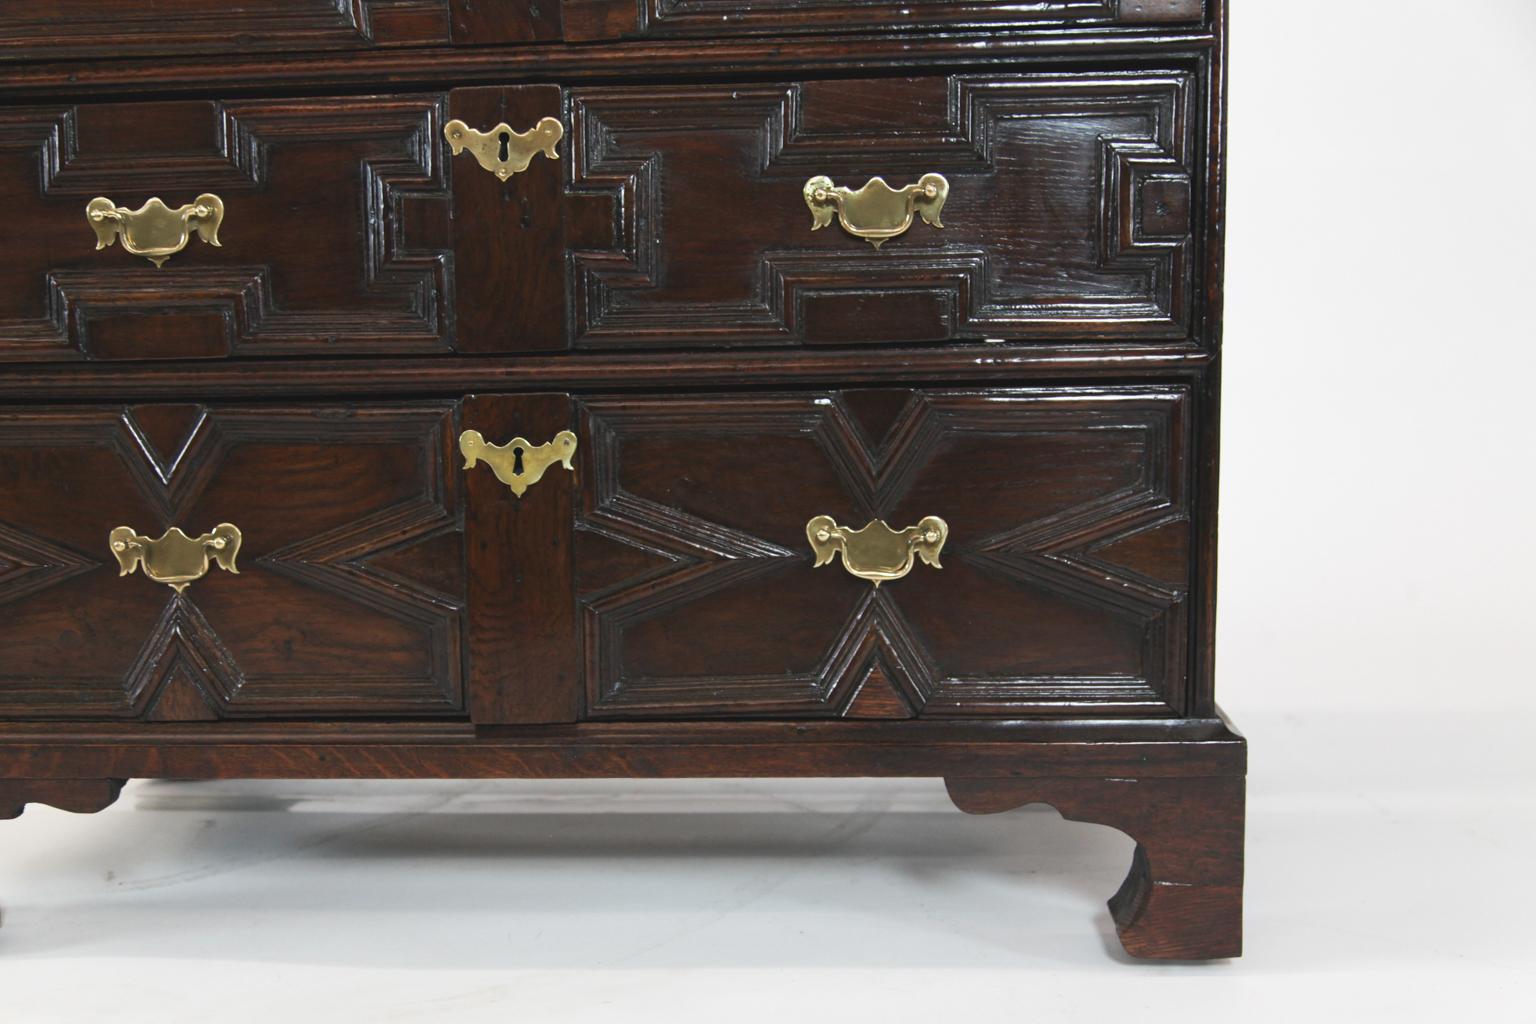 18th century English oak geometric chest, with two over three drawer arrangement with varying geometric designs on bracket feet.